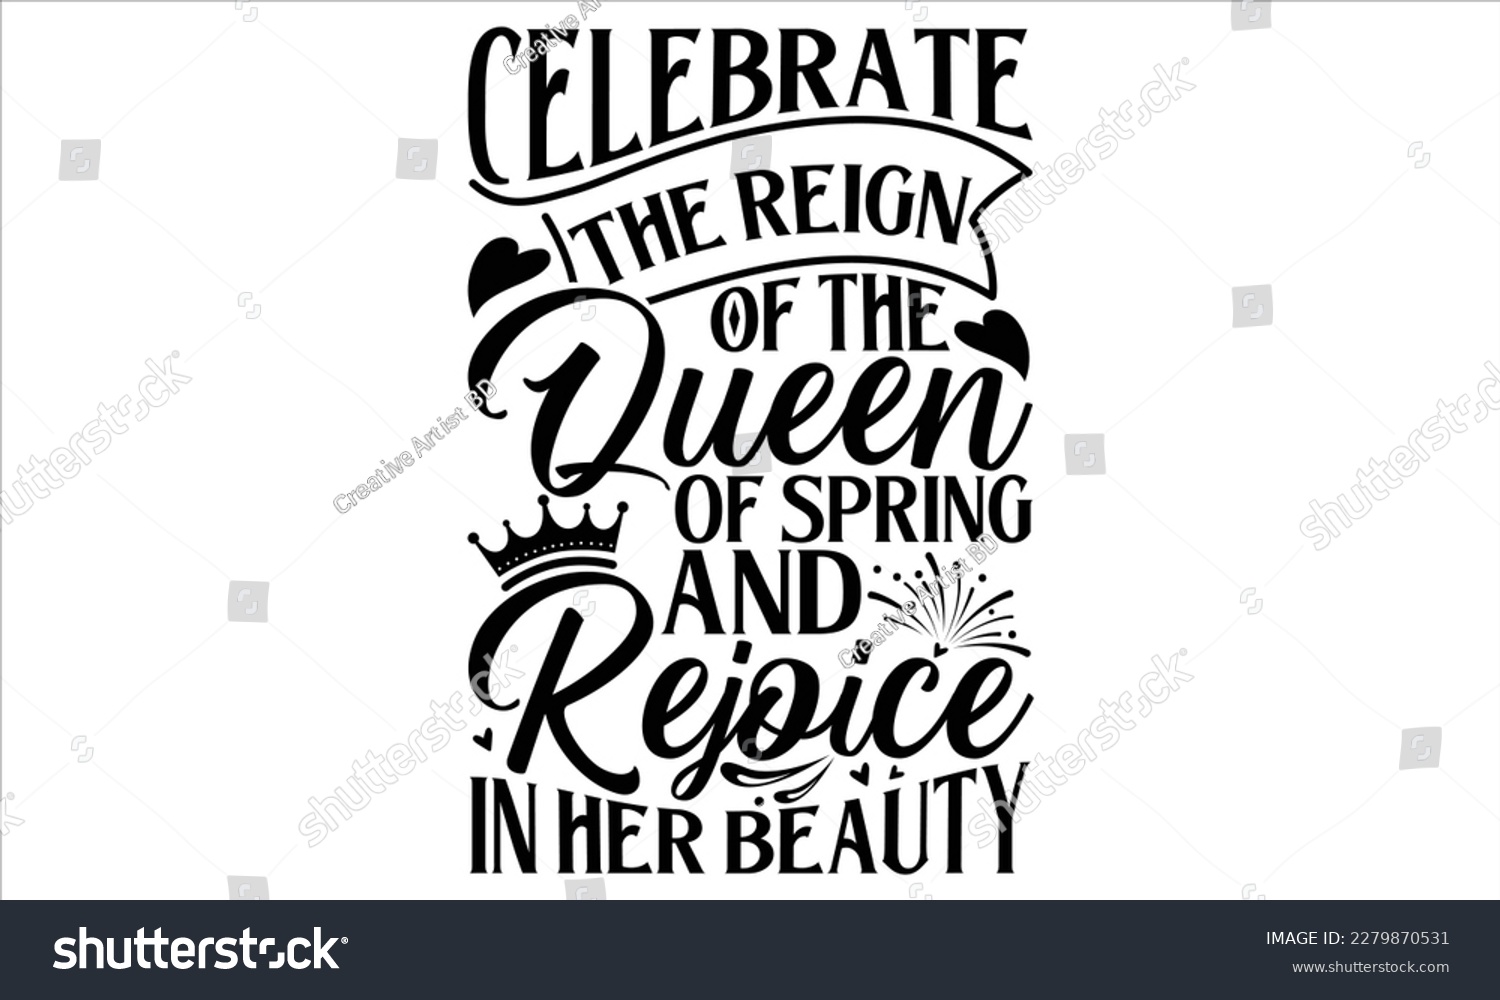 SVG of Celebrate The Reign Of The Queen Of Spring And Rejoice In Her Beauty- Victoria Day T Shirt Design, Vintage style, used for poster svg cut file, svg file, poster, banner, flyer and mug. svg